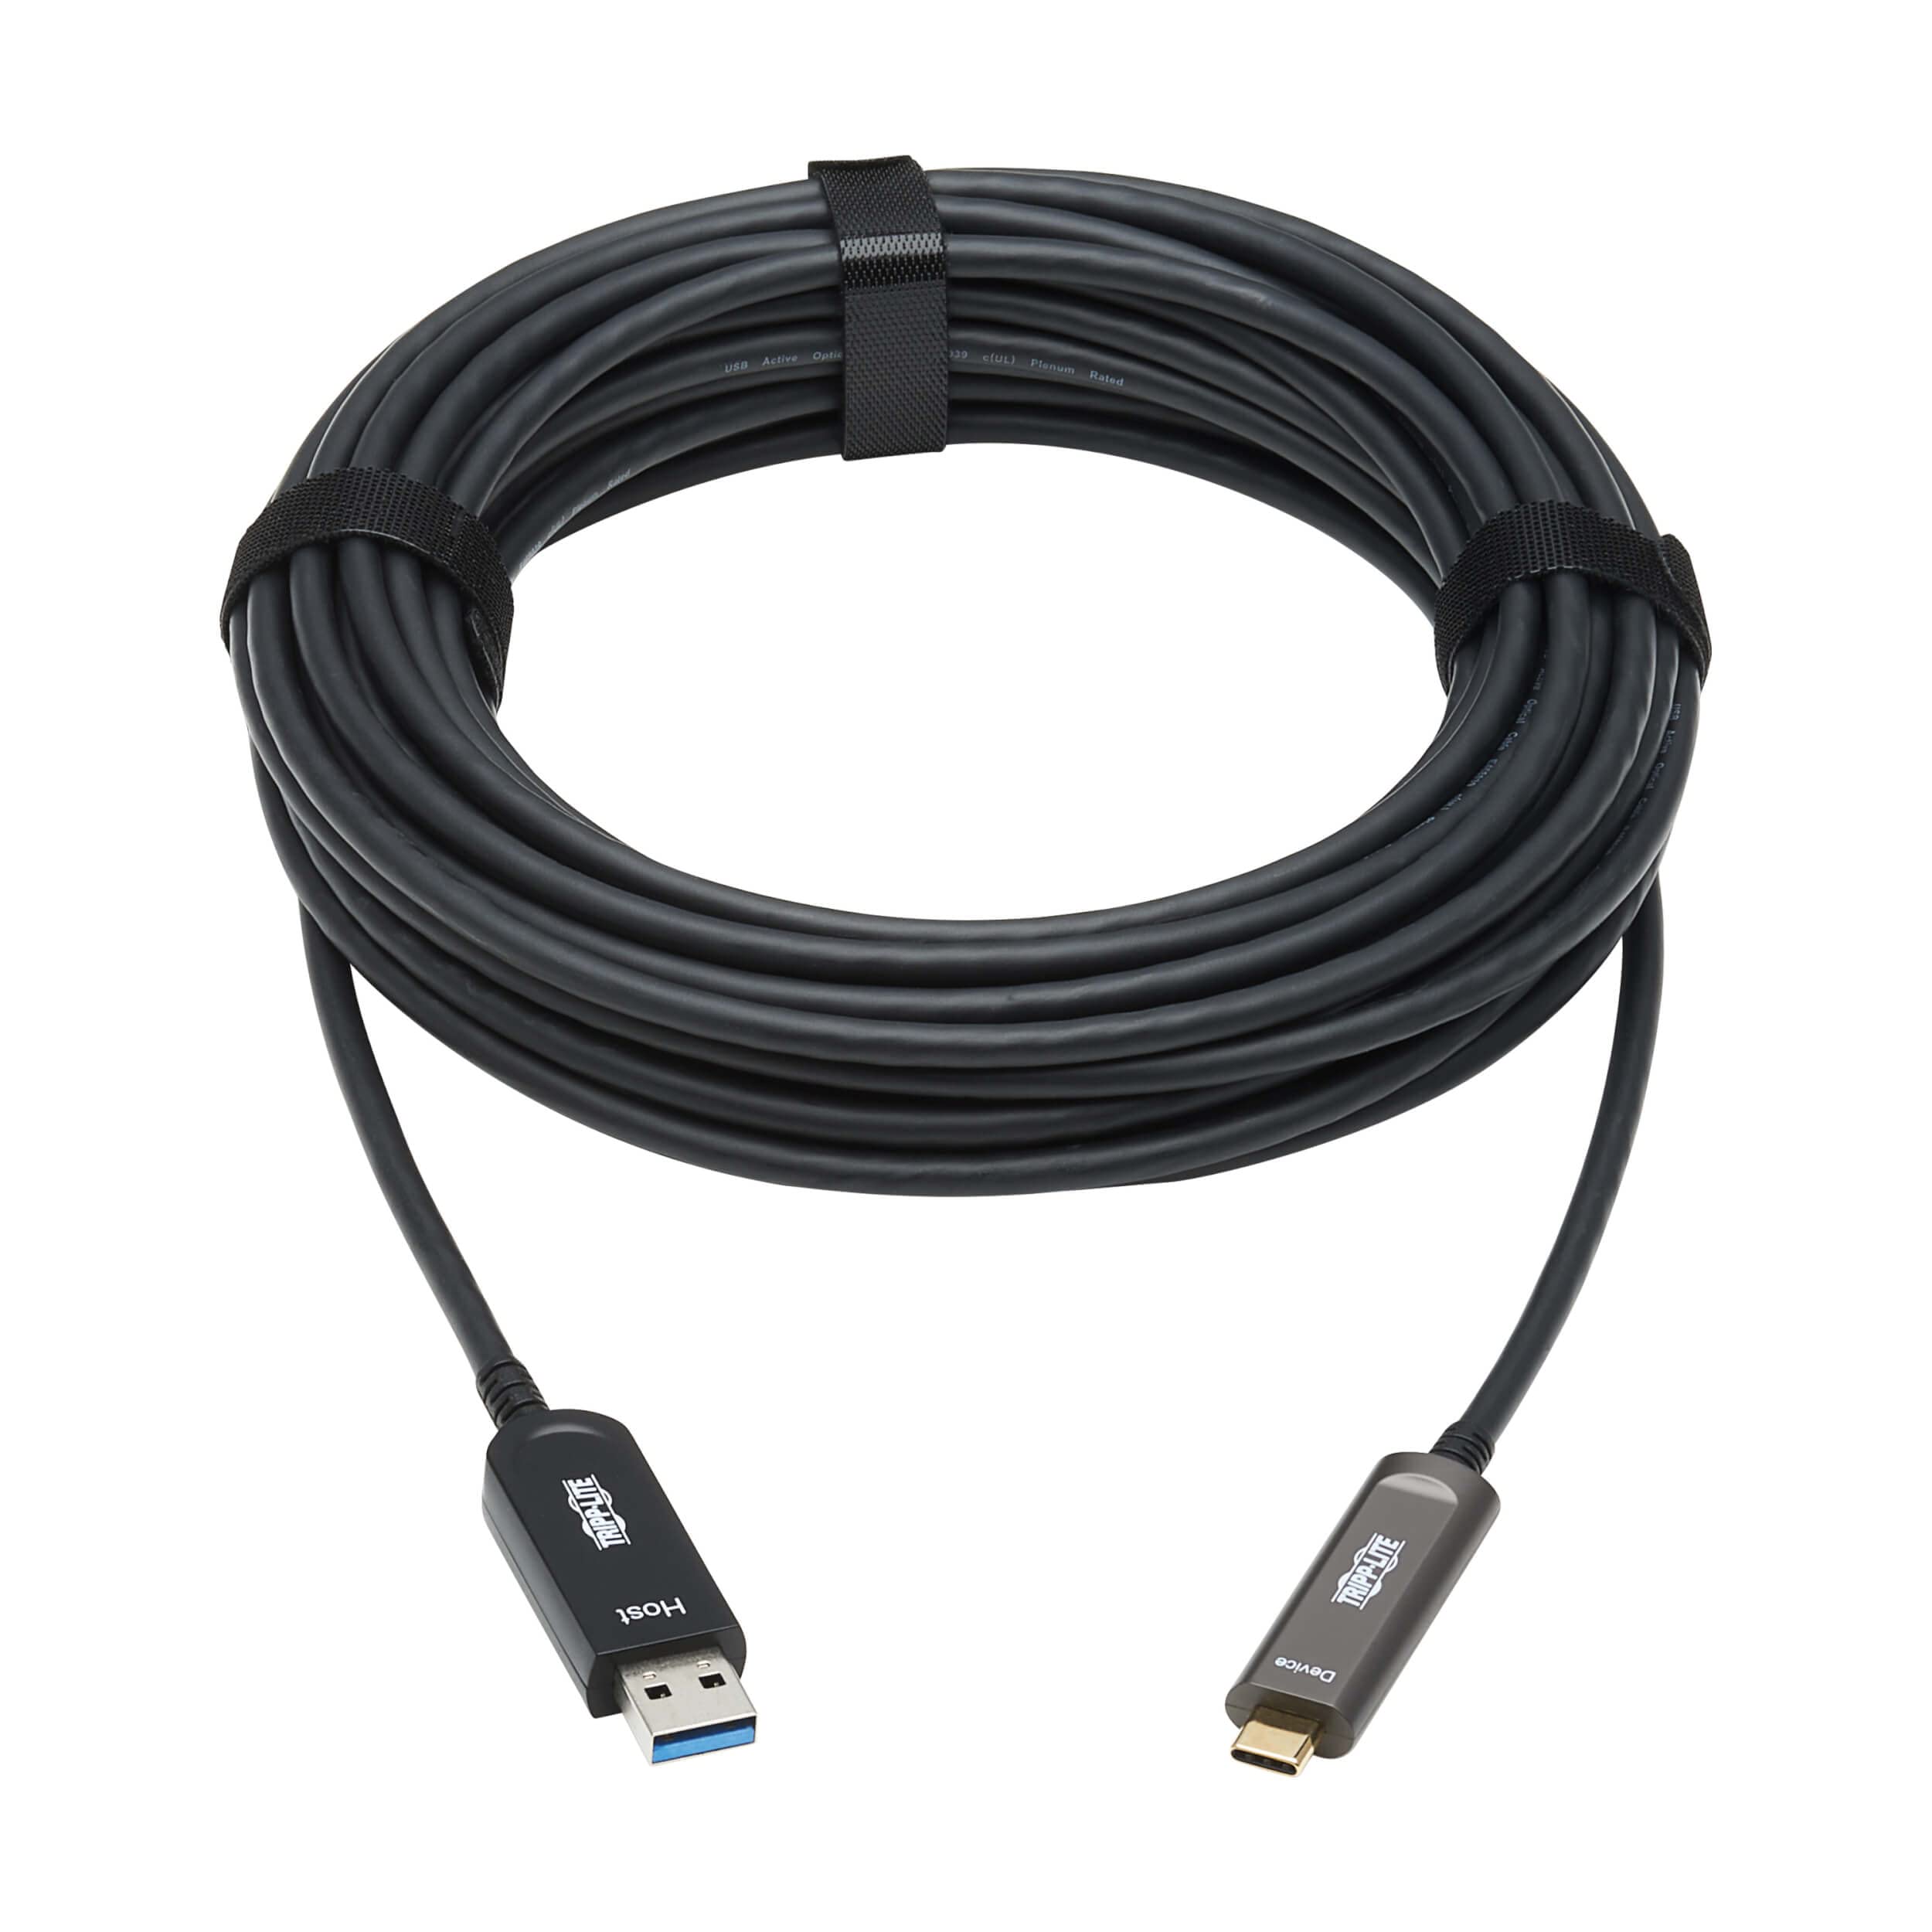 Tripp Lite Long Distance USB-A to USB-C Cable, 33 Feet / 10 Meters, 10 Gbps Data, Does Not Charge, Fiber Active Cable, Backward Compatible USB 3.2 Gen 2, Male-to-Male, 3-Year Warranty (U428F-10M-D321)